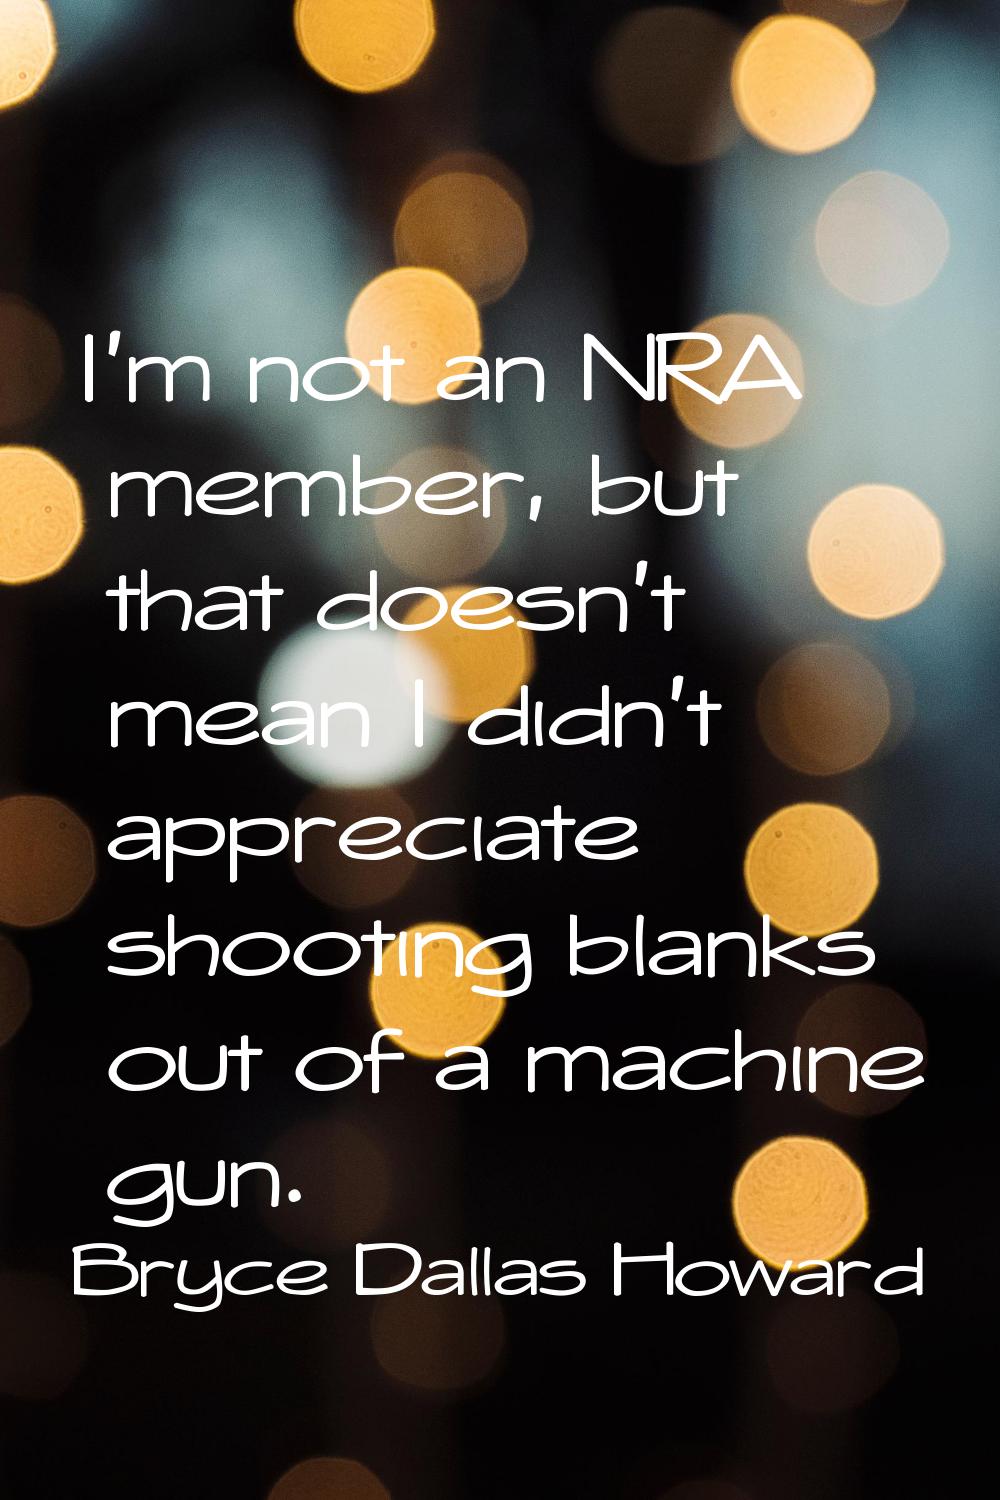 I'm not an NRA member, but that doesn't mean I didn't appreciate shooting blanks out of a machine g